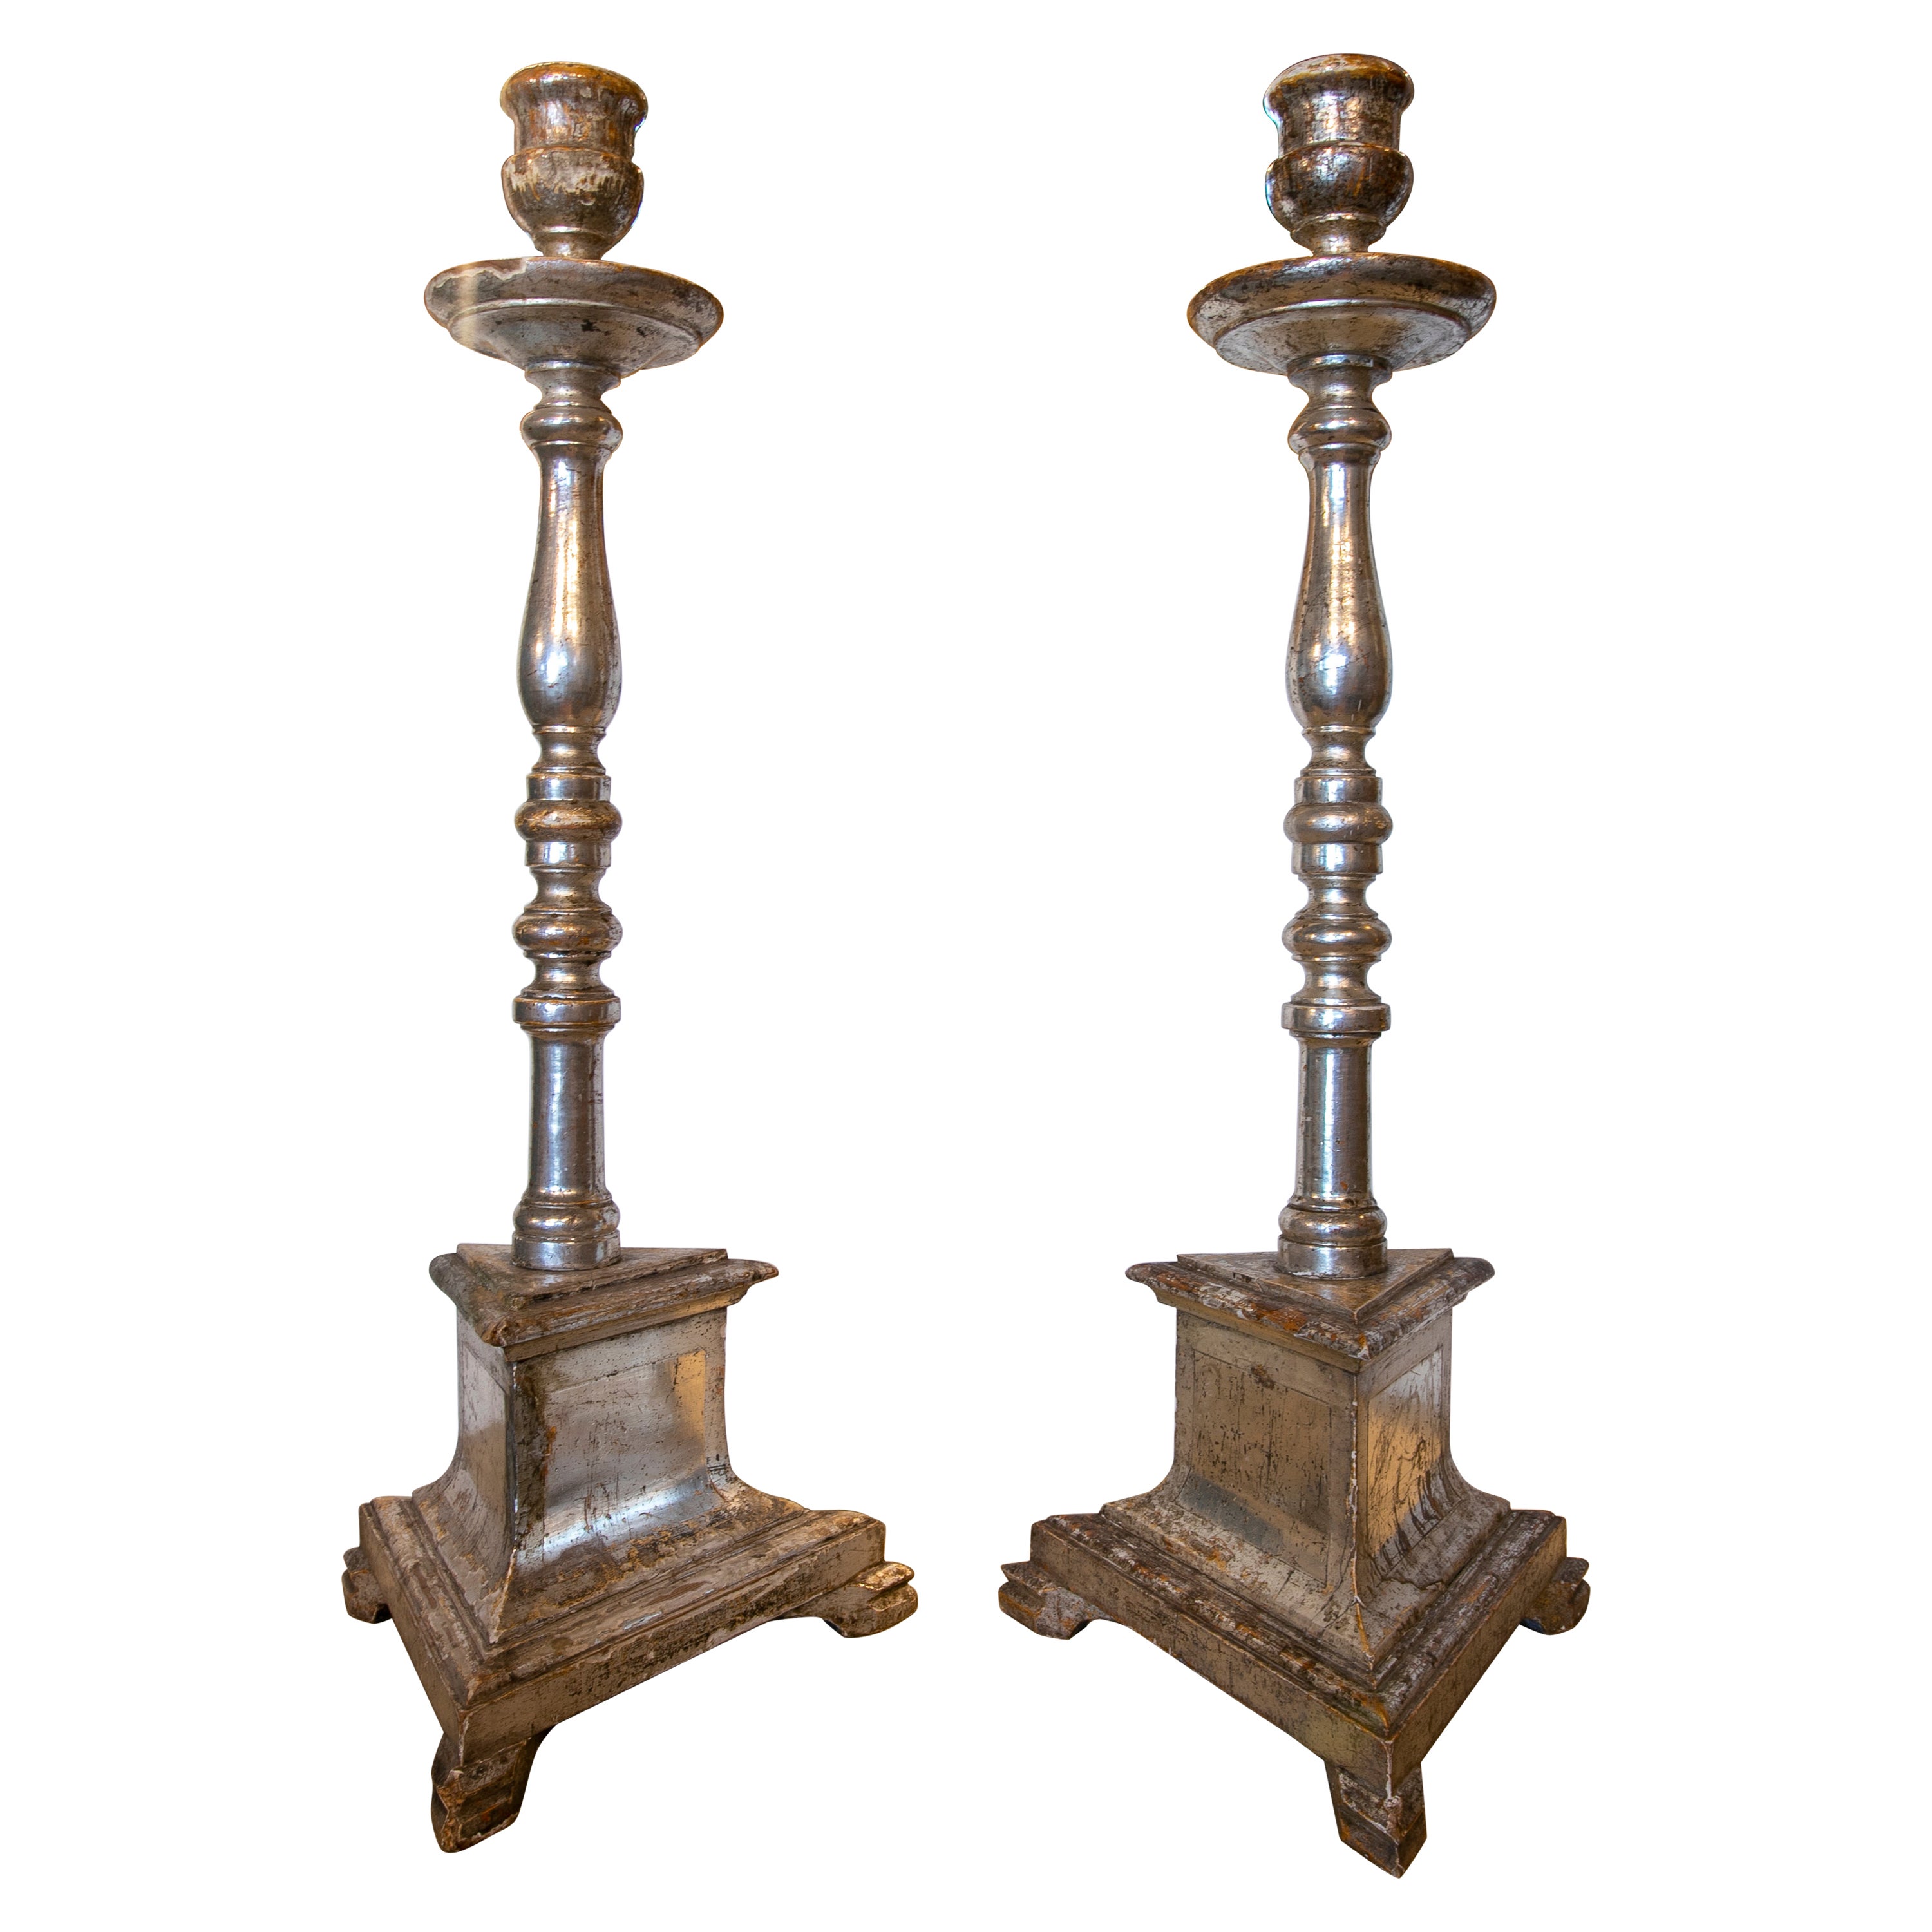 18th century Spanish Pair of Wooden Axe Holders Silver Plated